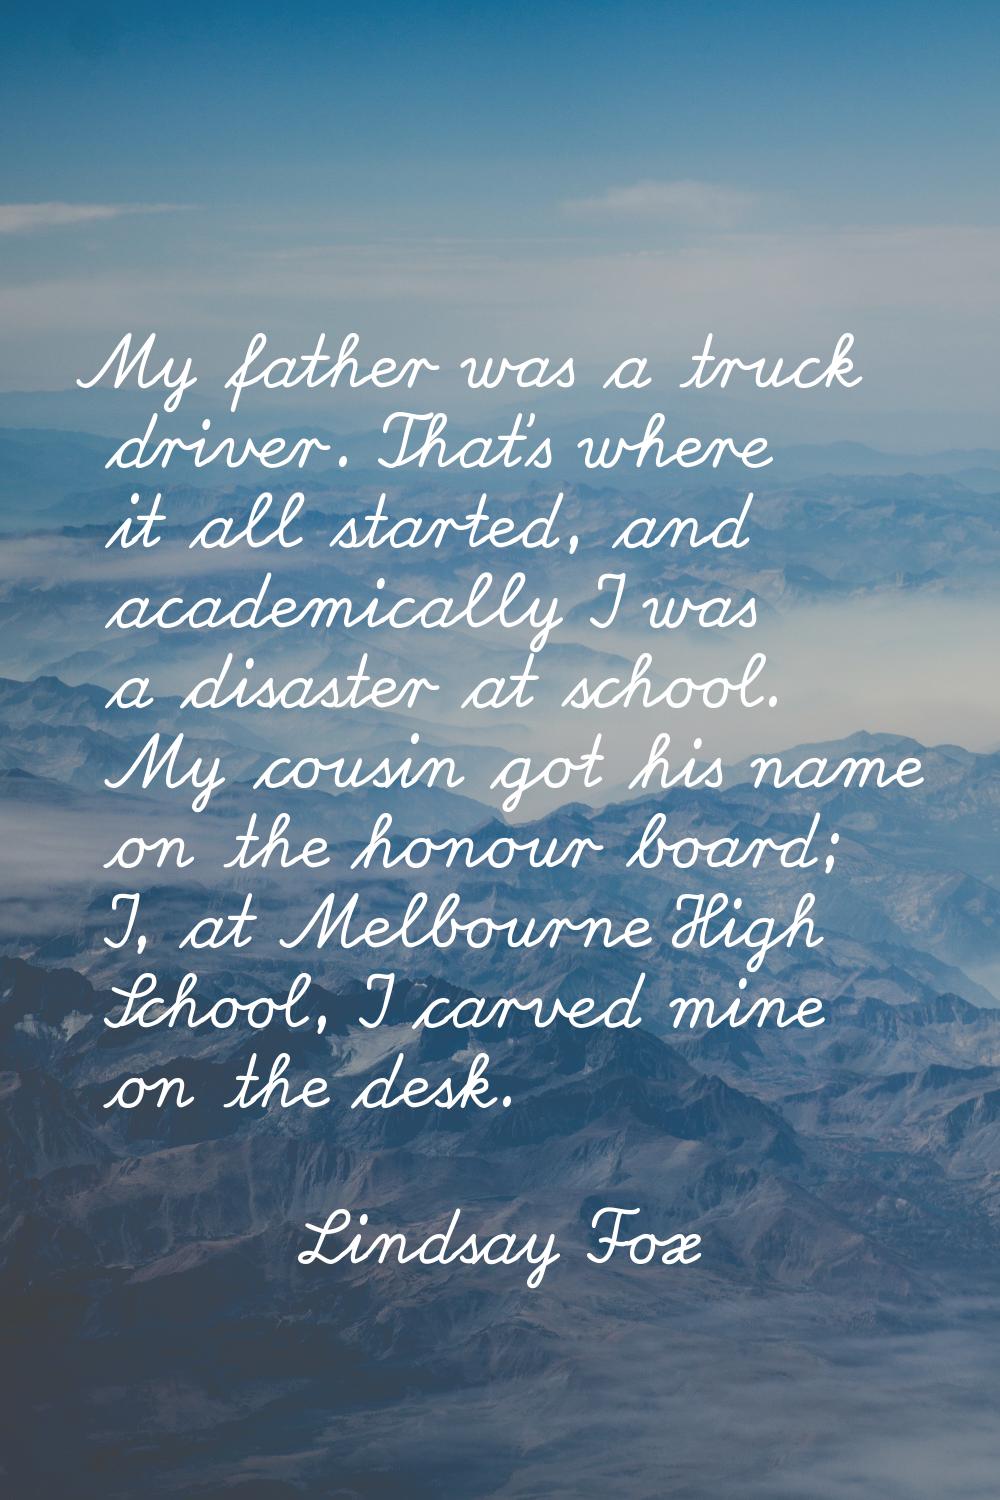 My father was a truck driver. That's where it all started, and academically I was a disaster at sch